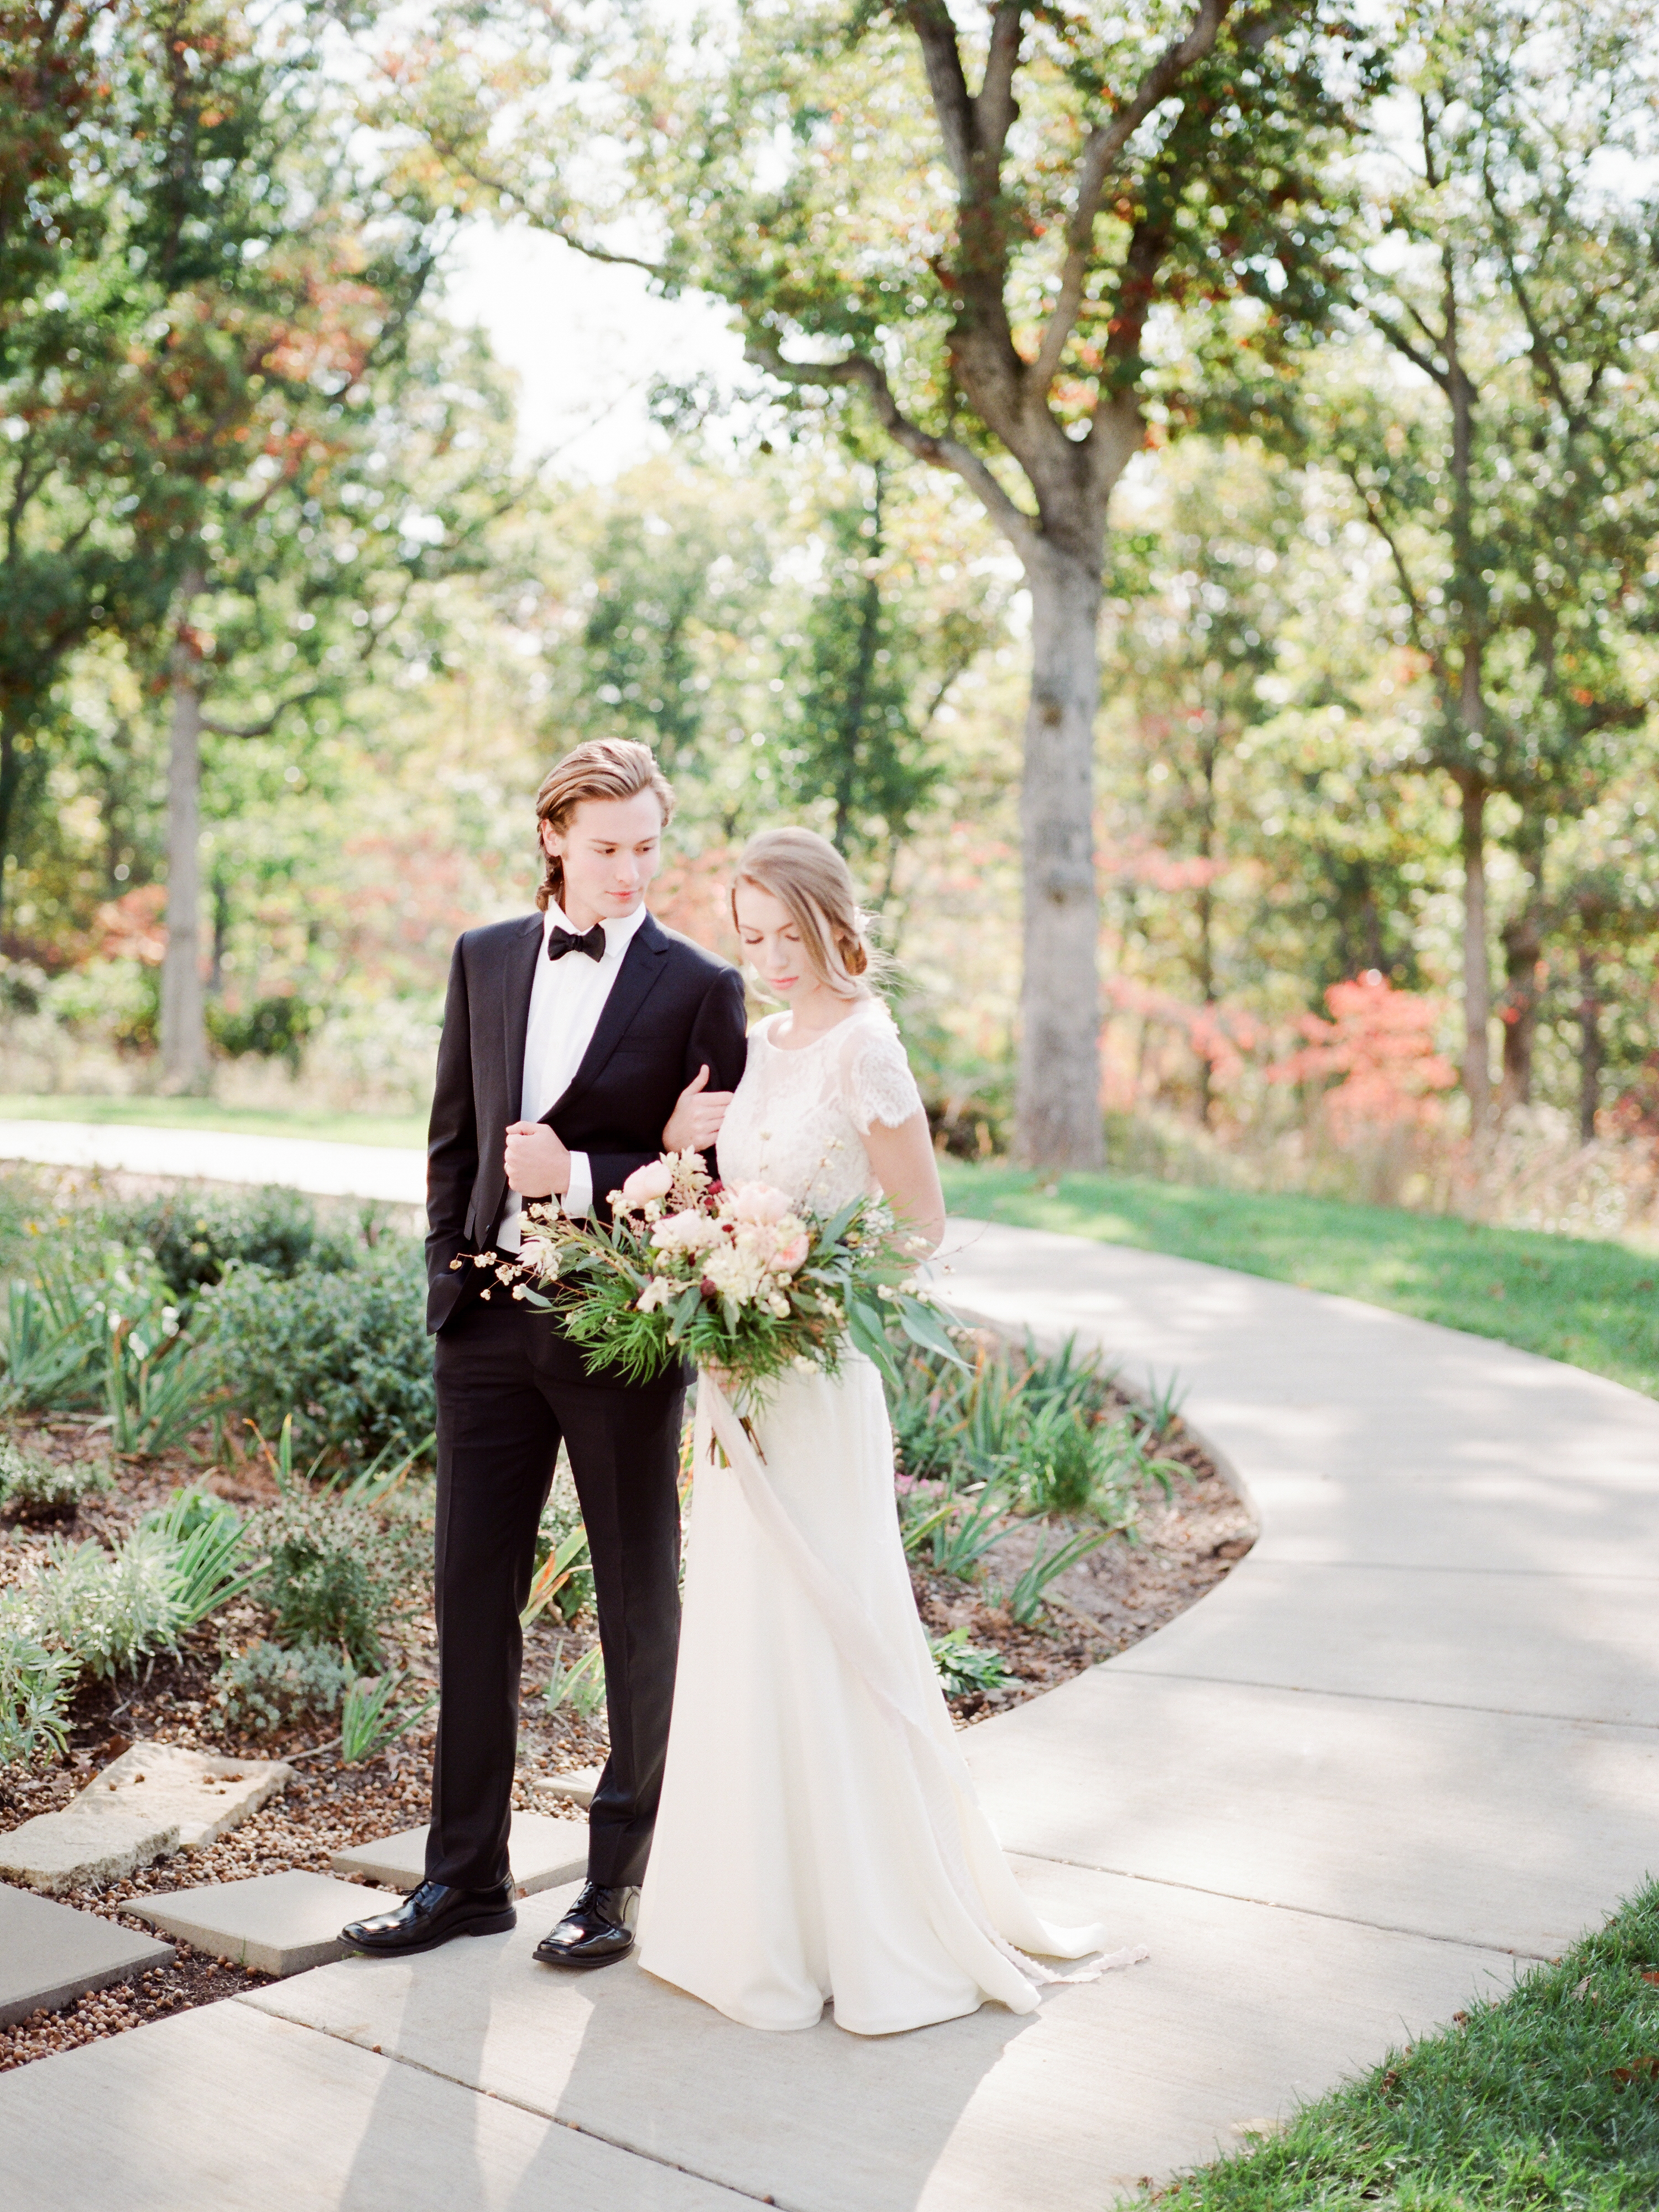 Film wedding photographer Love Tree Studios captures a beautiful bride and groom at St. Louis Missouri's new wedding venue Silver Oaks Chateau.